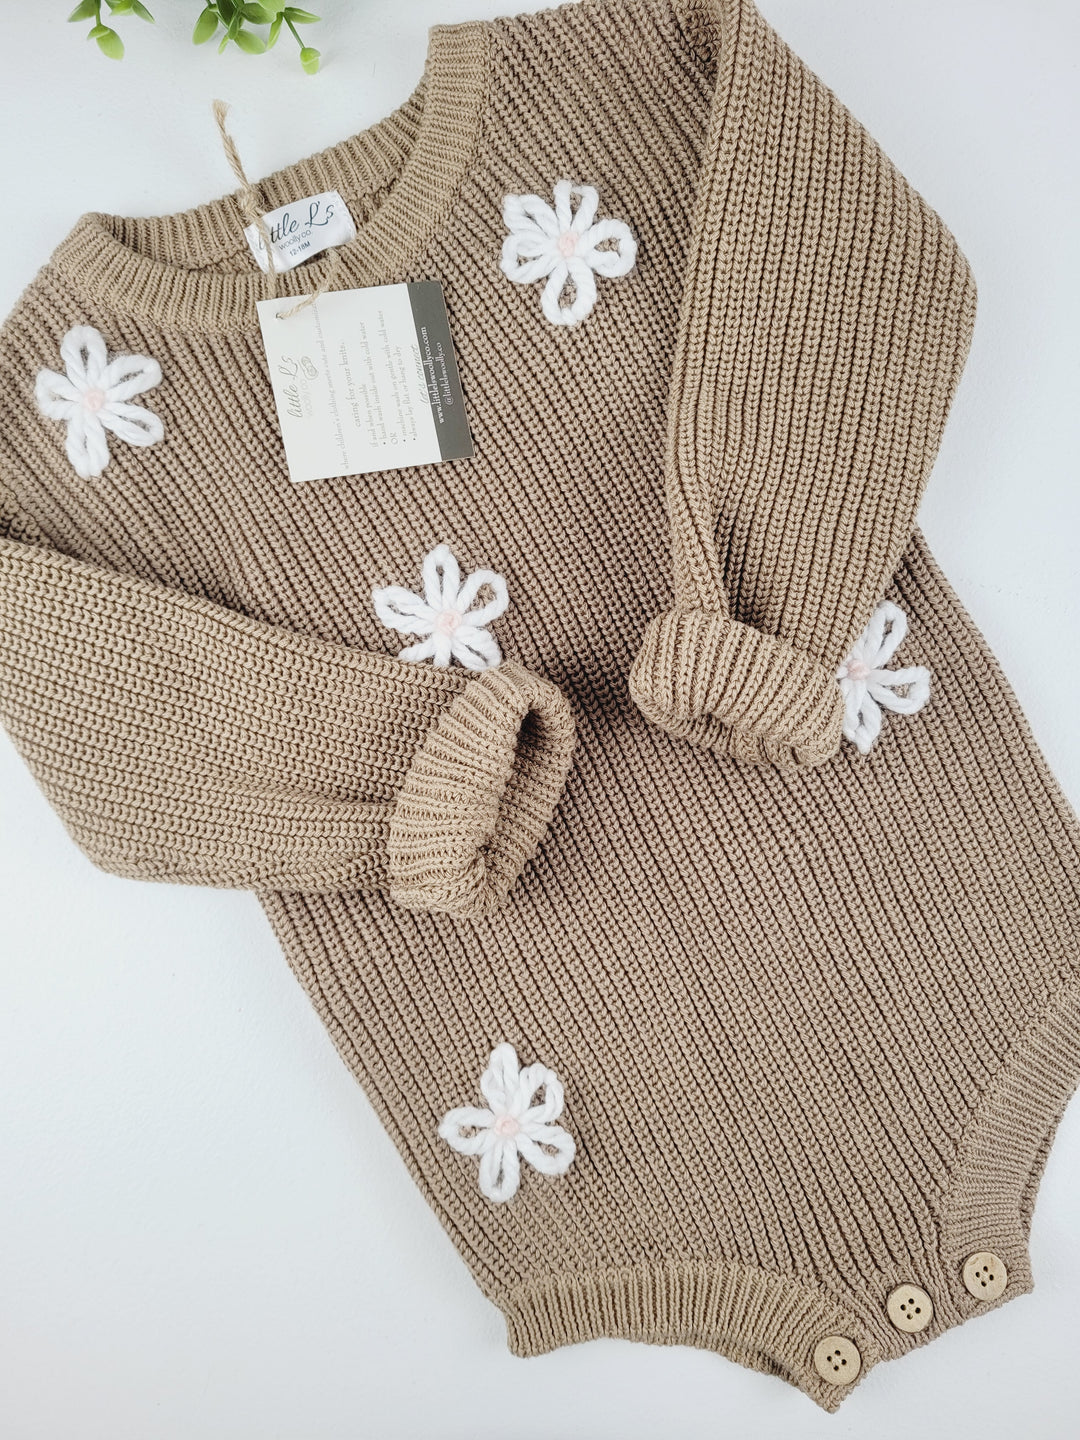 Little L's Woolly Co., Embroidered Mocha Floral Woolly Onesie 12-18 Months